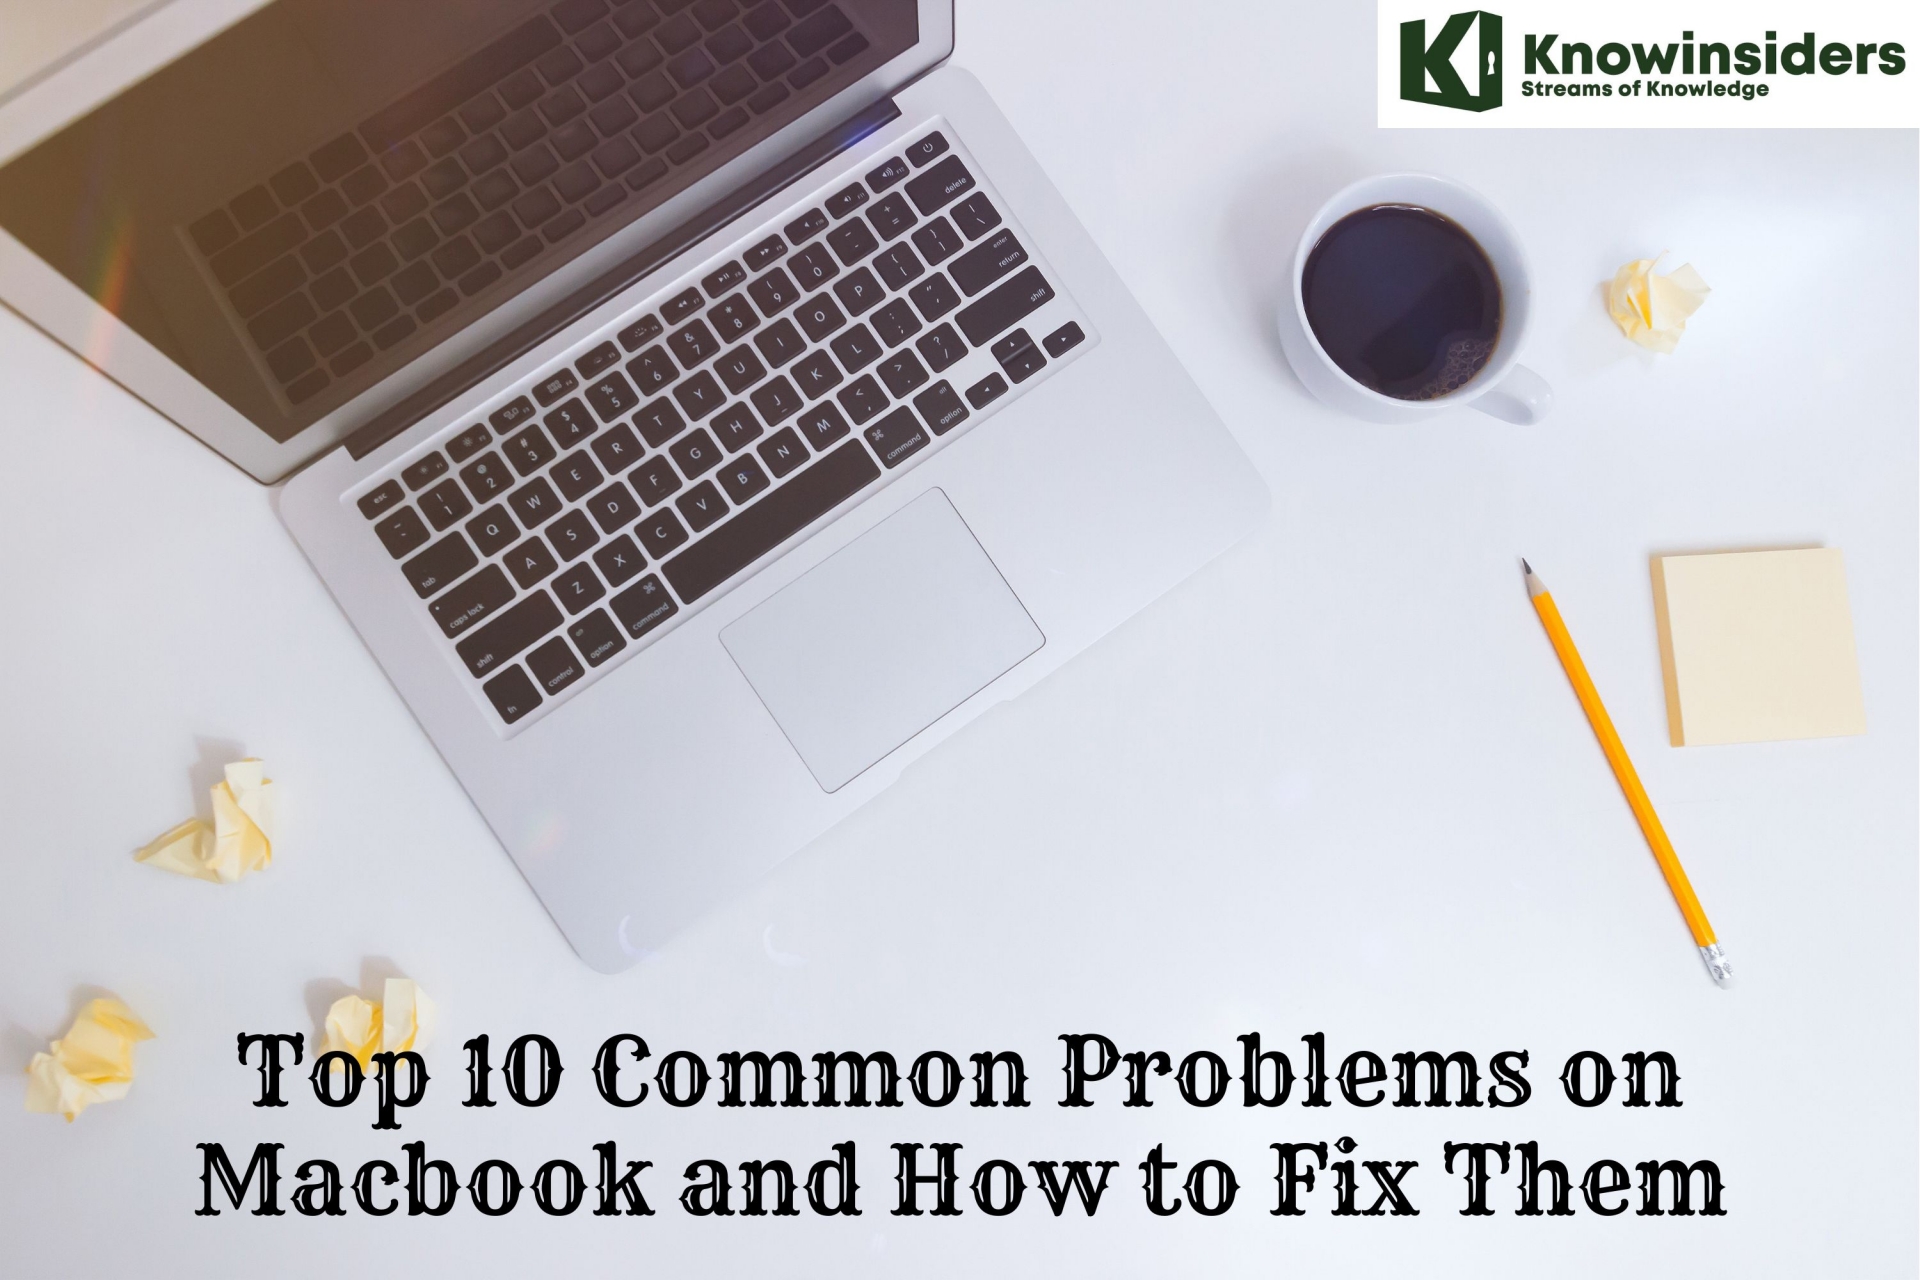 10 Common Problems on Macbook and Simple Ways to Fix Them